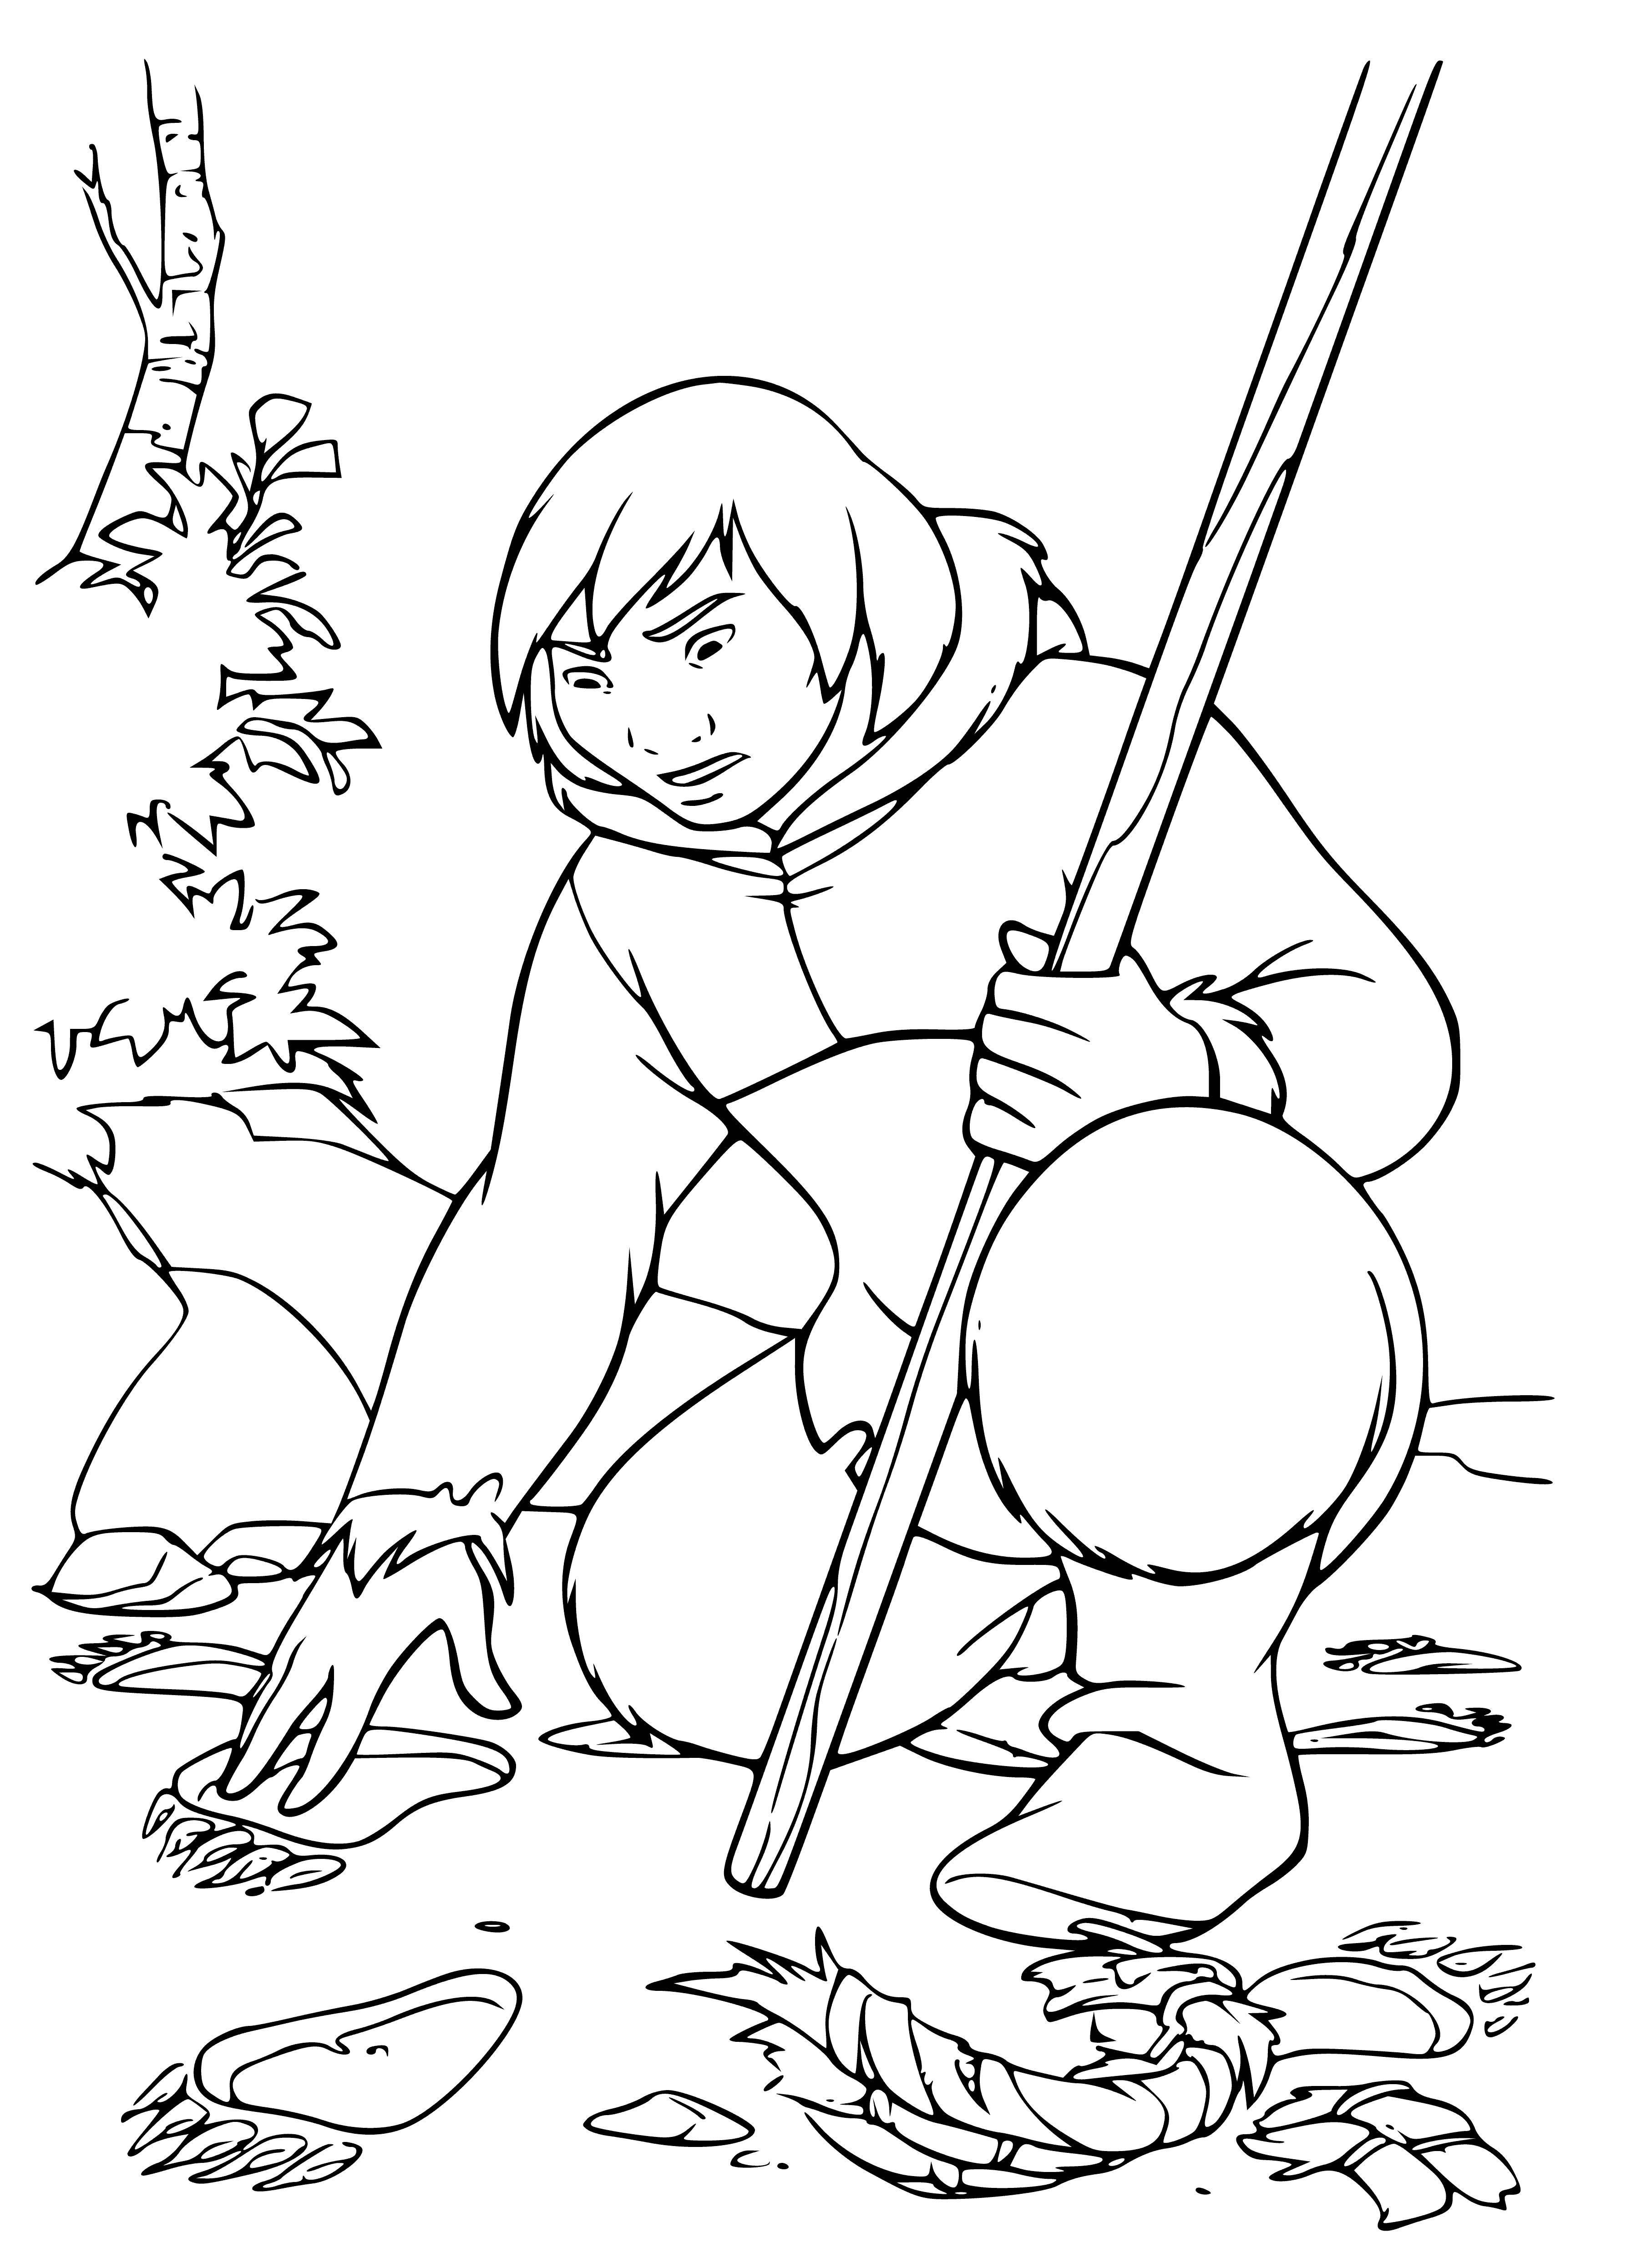 Traces coloring page